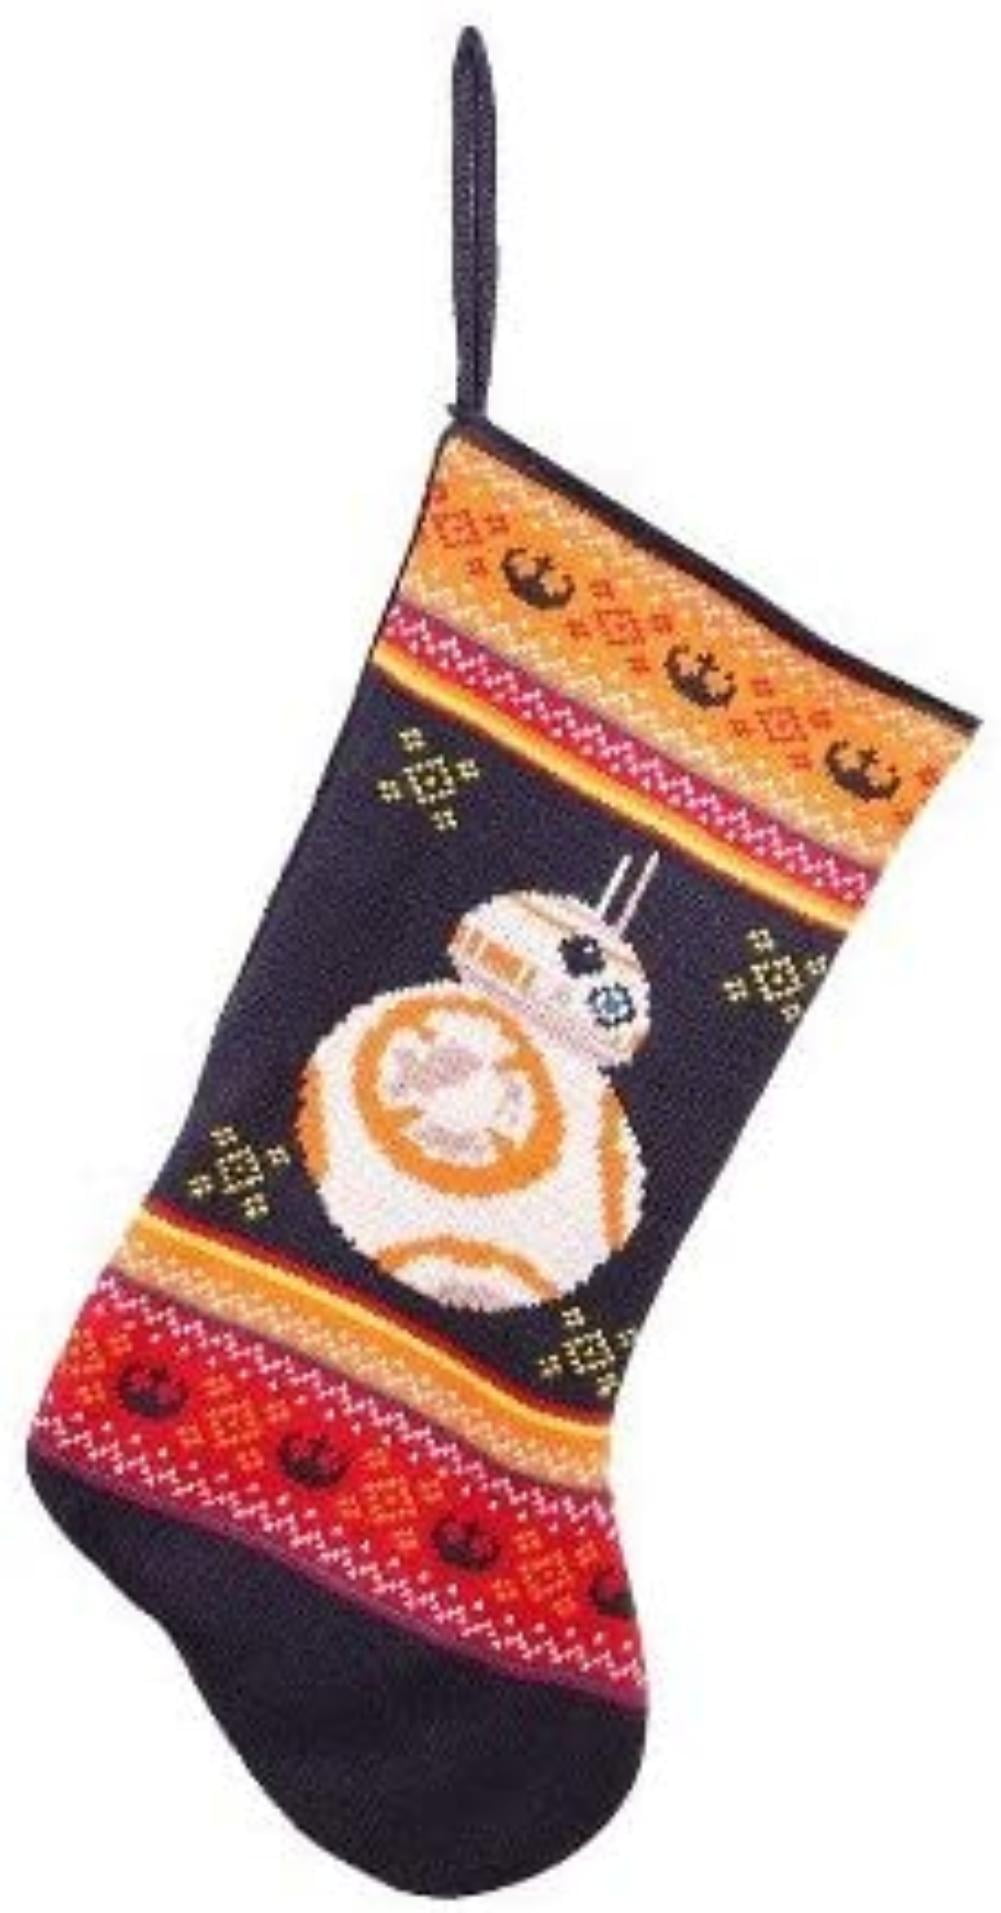 Star Wars Harry Potter New & Official In Pack DC Comics Christmas Stocking 